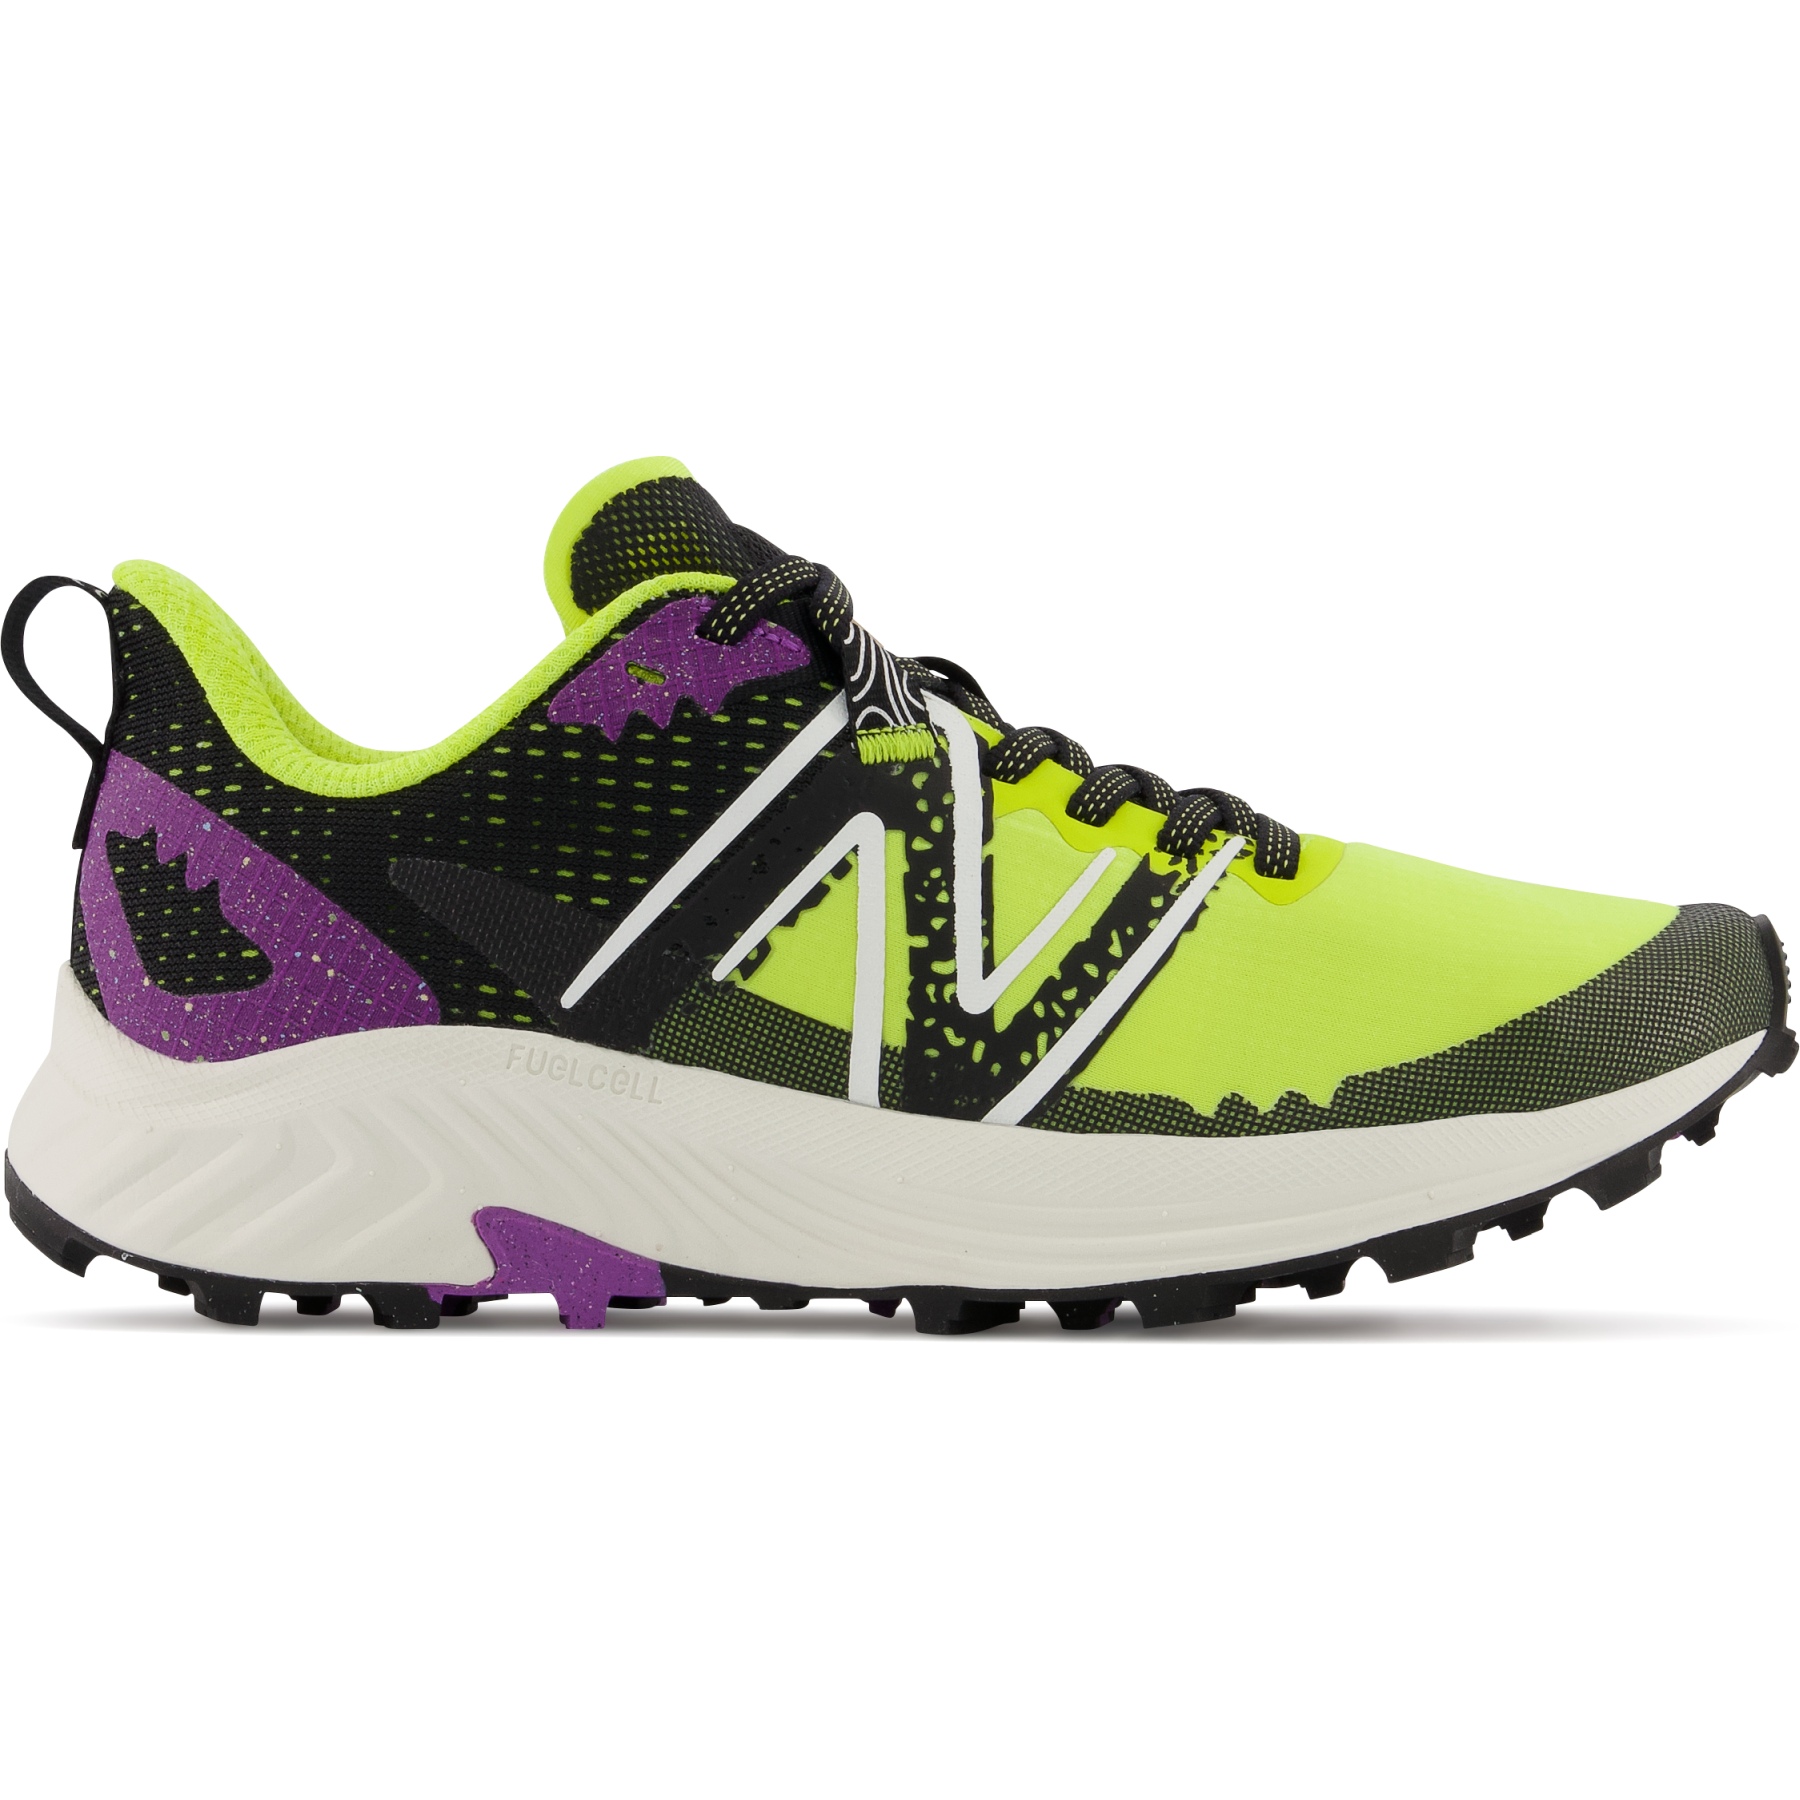 Image de New Balance FuelCell Summit Unknown v3 Chaussures Trailrunning Femme - Jaune